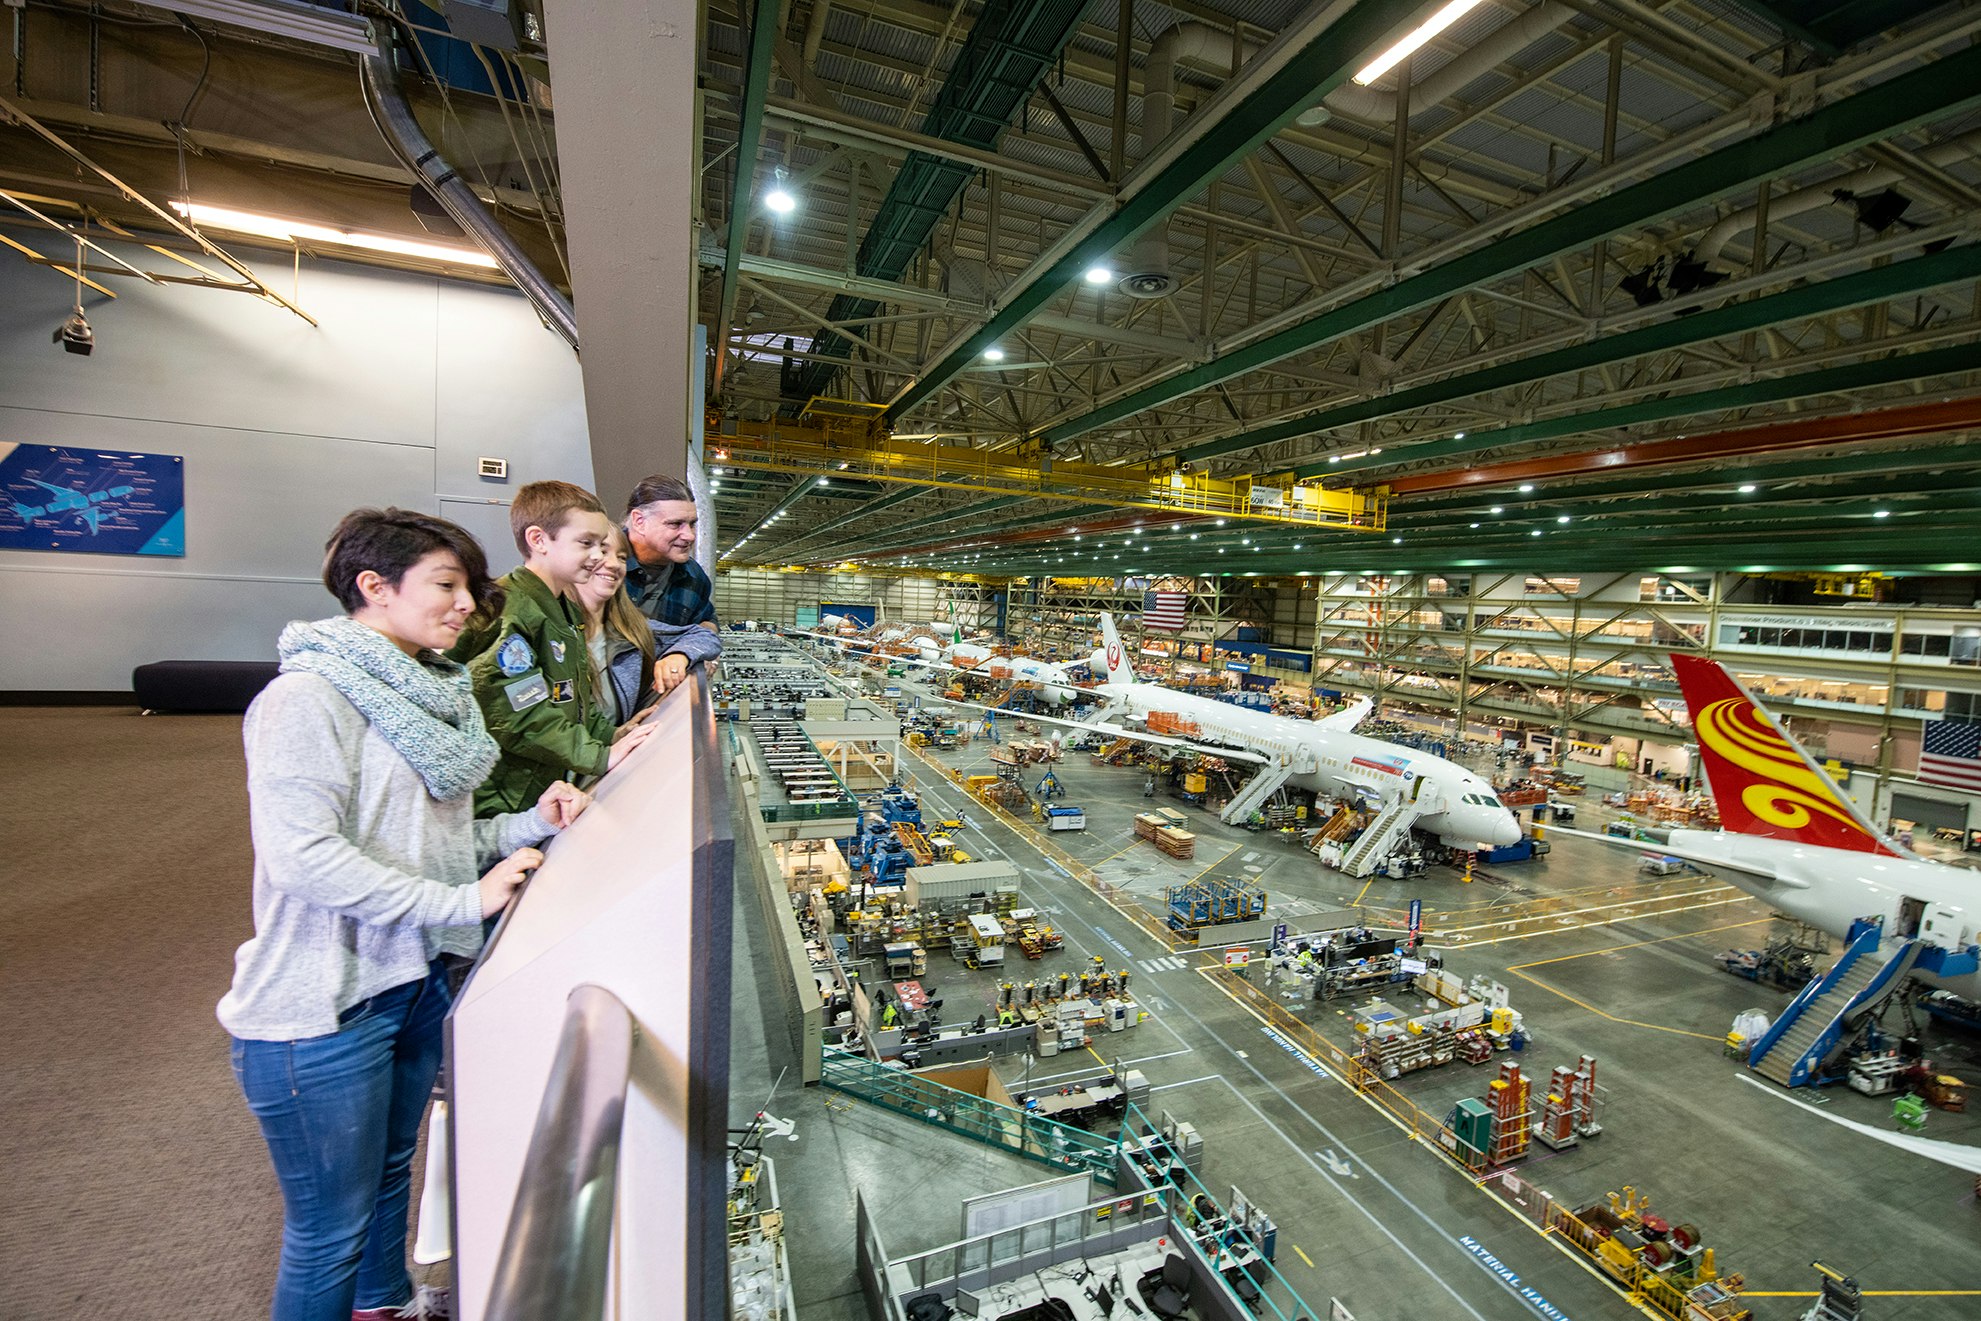 A family examines the Boeing factory, where large planes are made